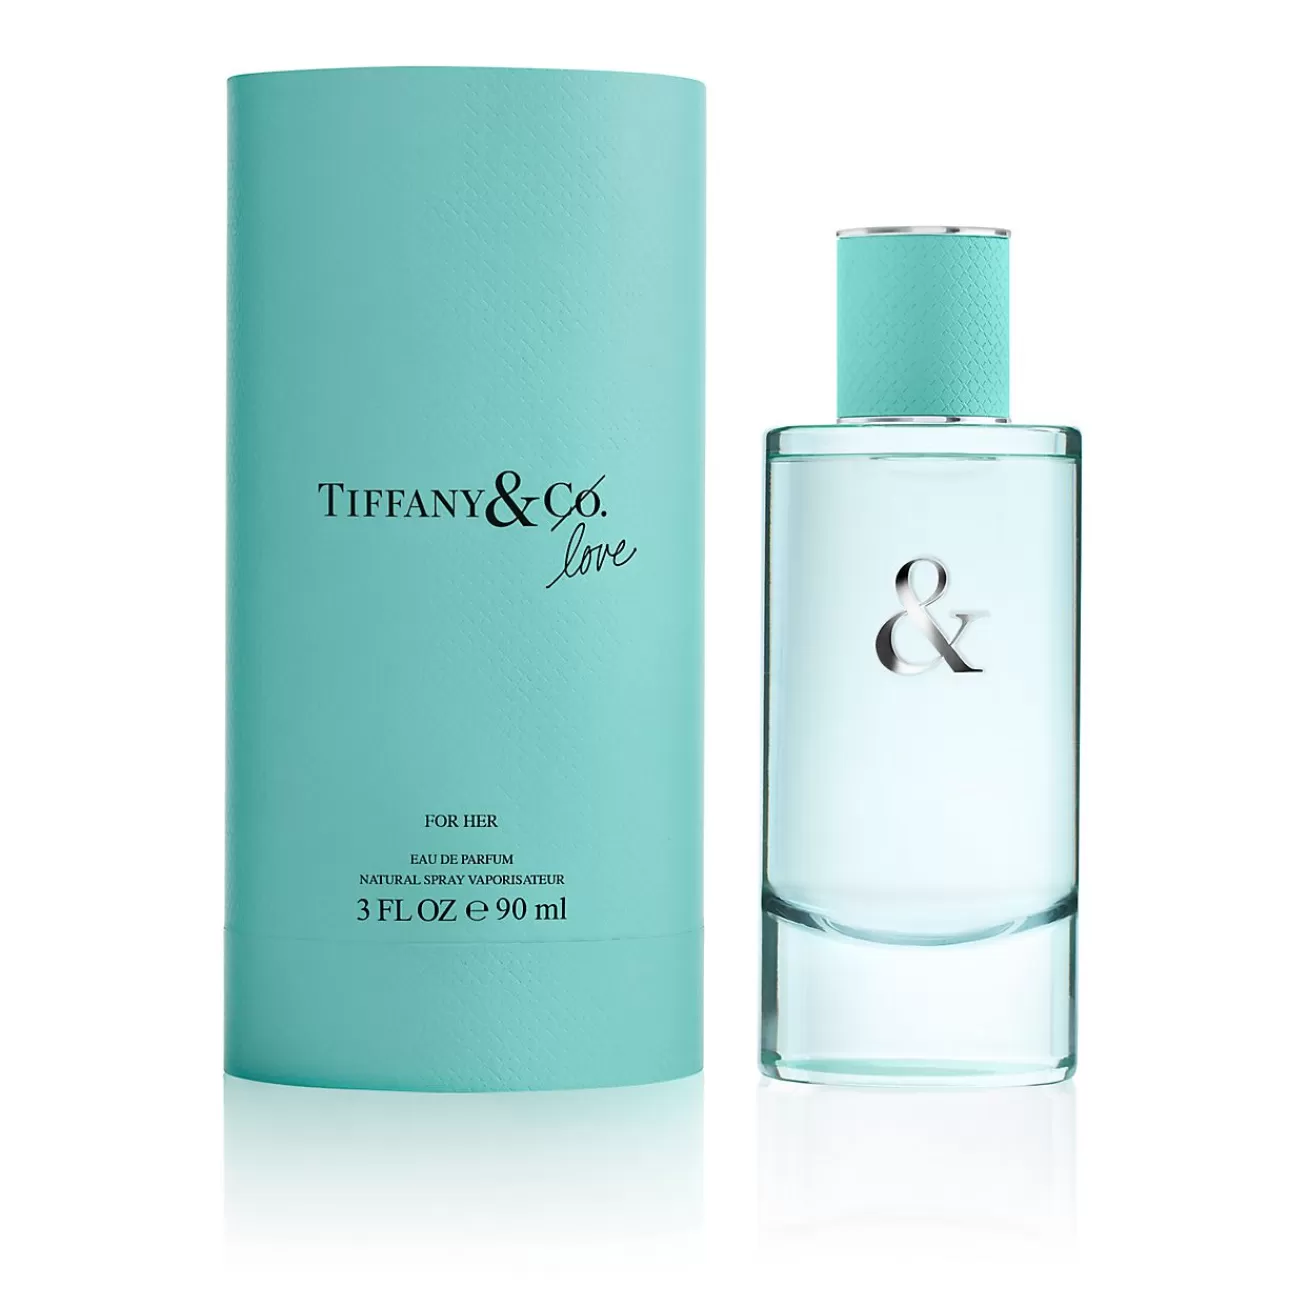 Tiffany & Co. Tiffany & Love Eau de Parfum for Her, 3.0 ounces. | ^ Tiffany Blue® Gifts | Anniversary Gifts